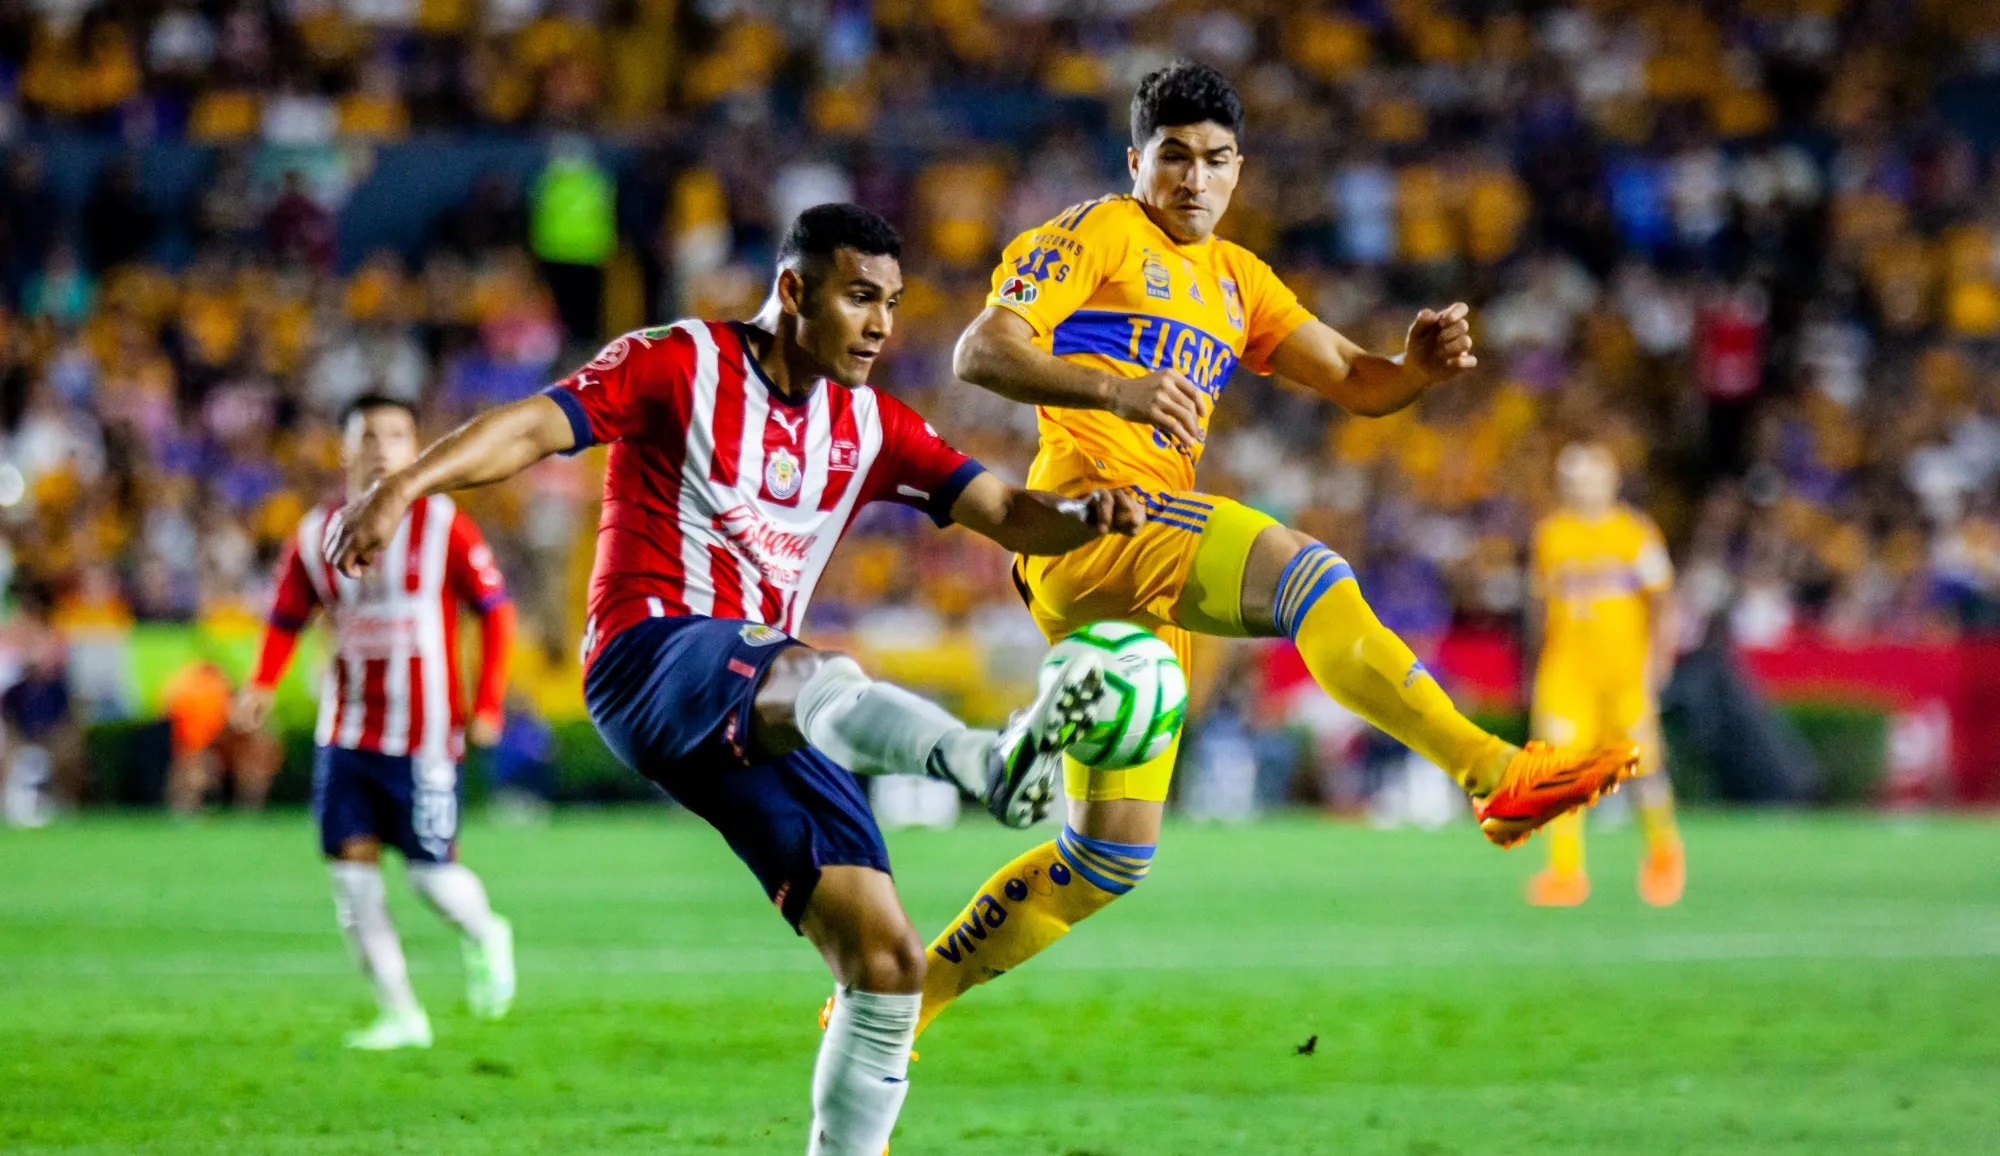 Chivas vs Tigres TV to watch the final of the Liga MX in the United States